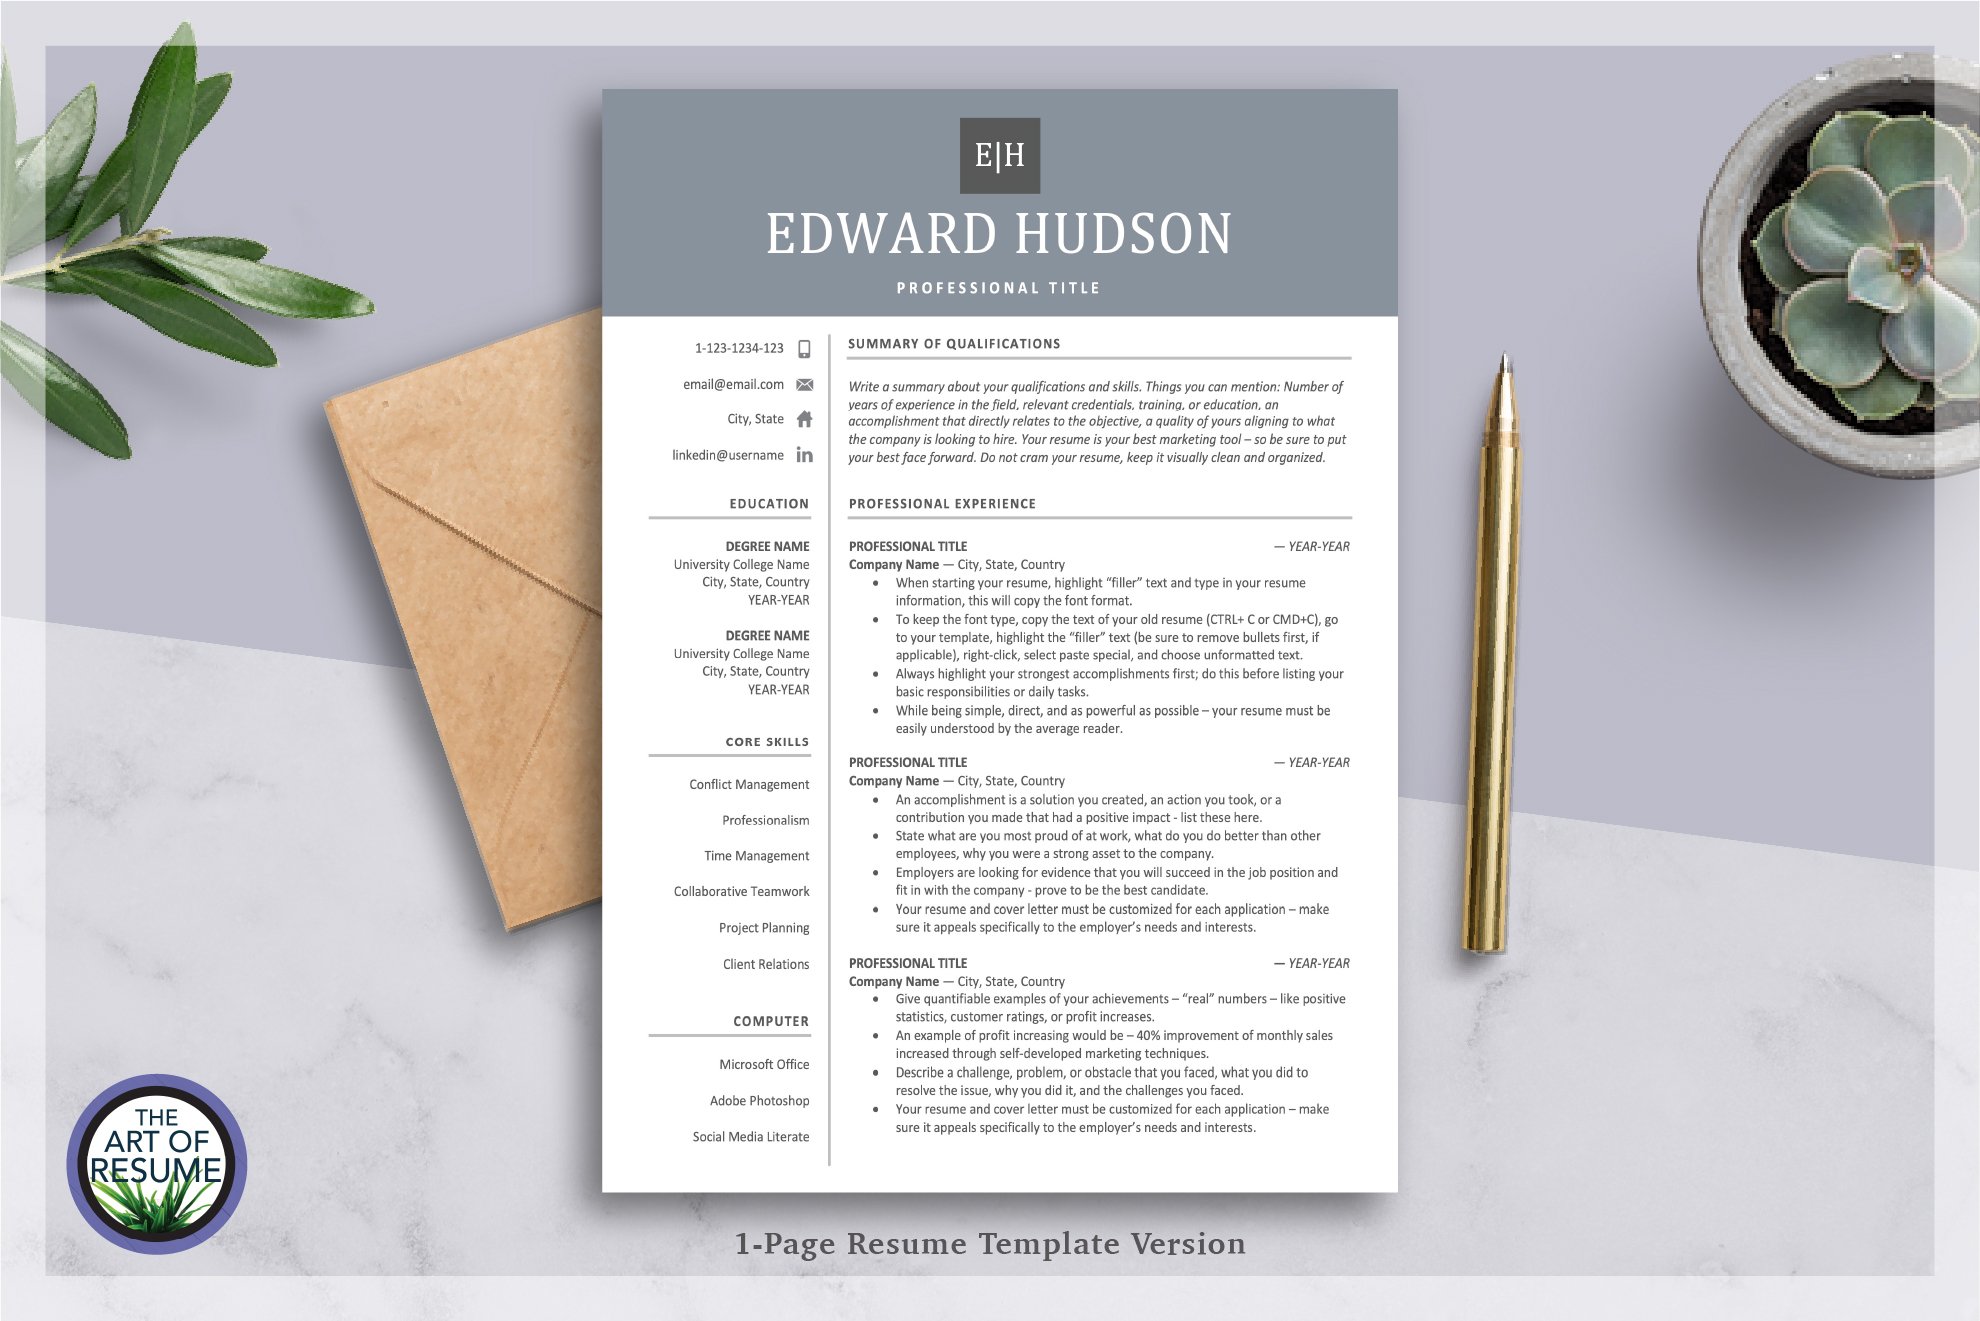 Executive Resume | Cover Letter | CV preview image.